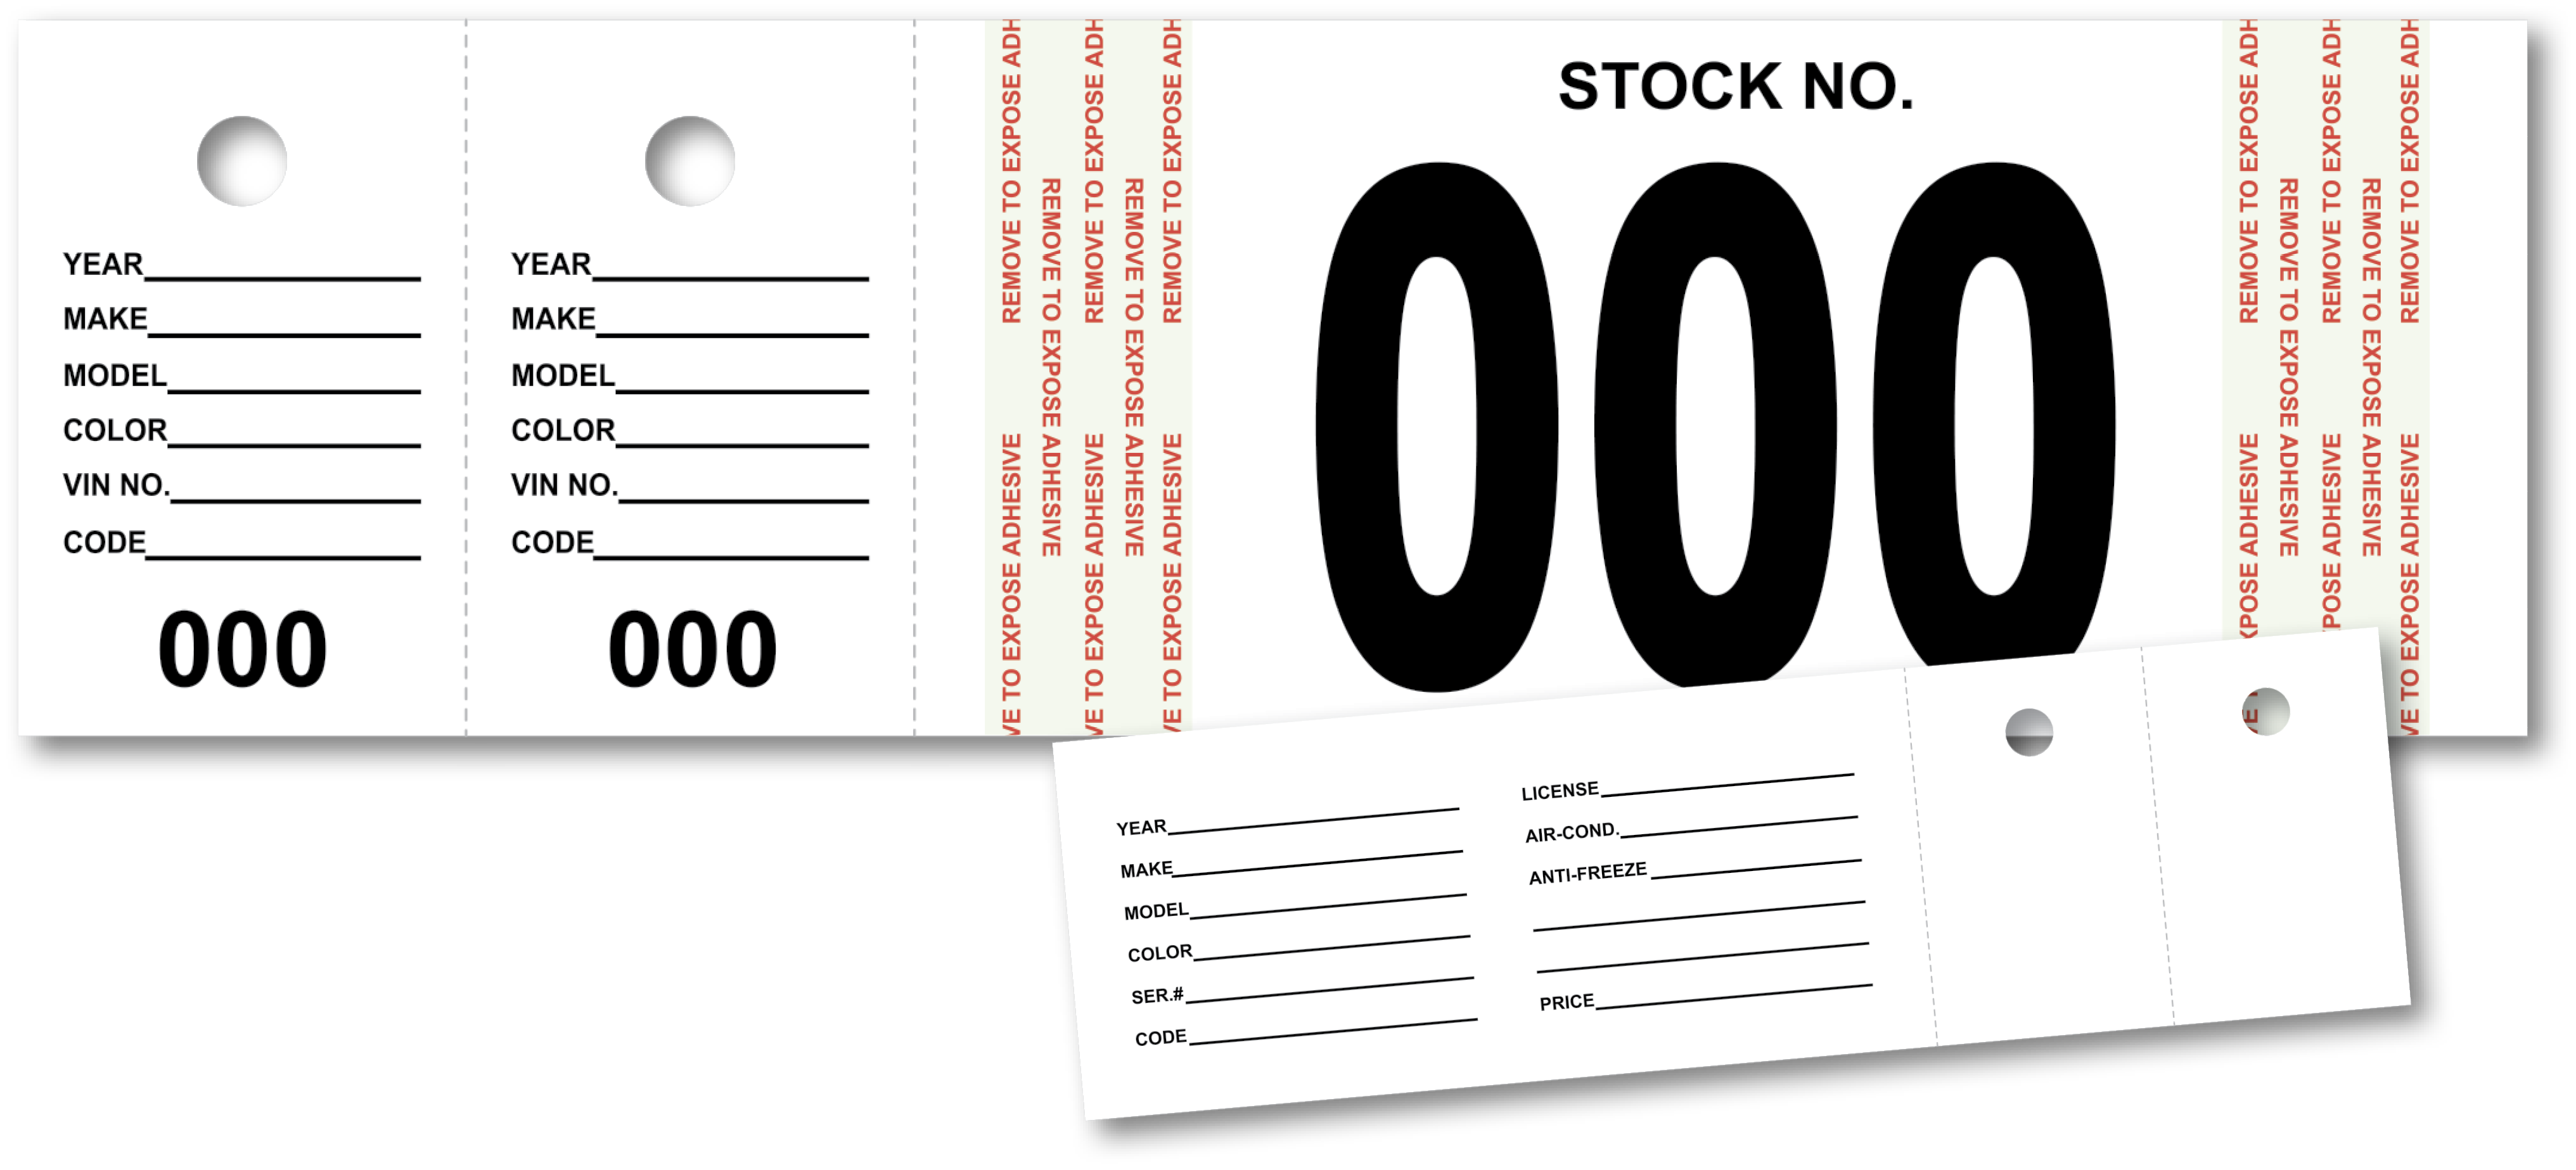 VEHICLE STOCK NUMBER TAGS 